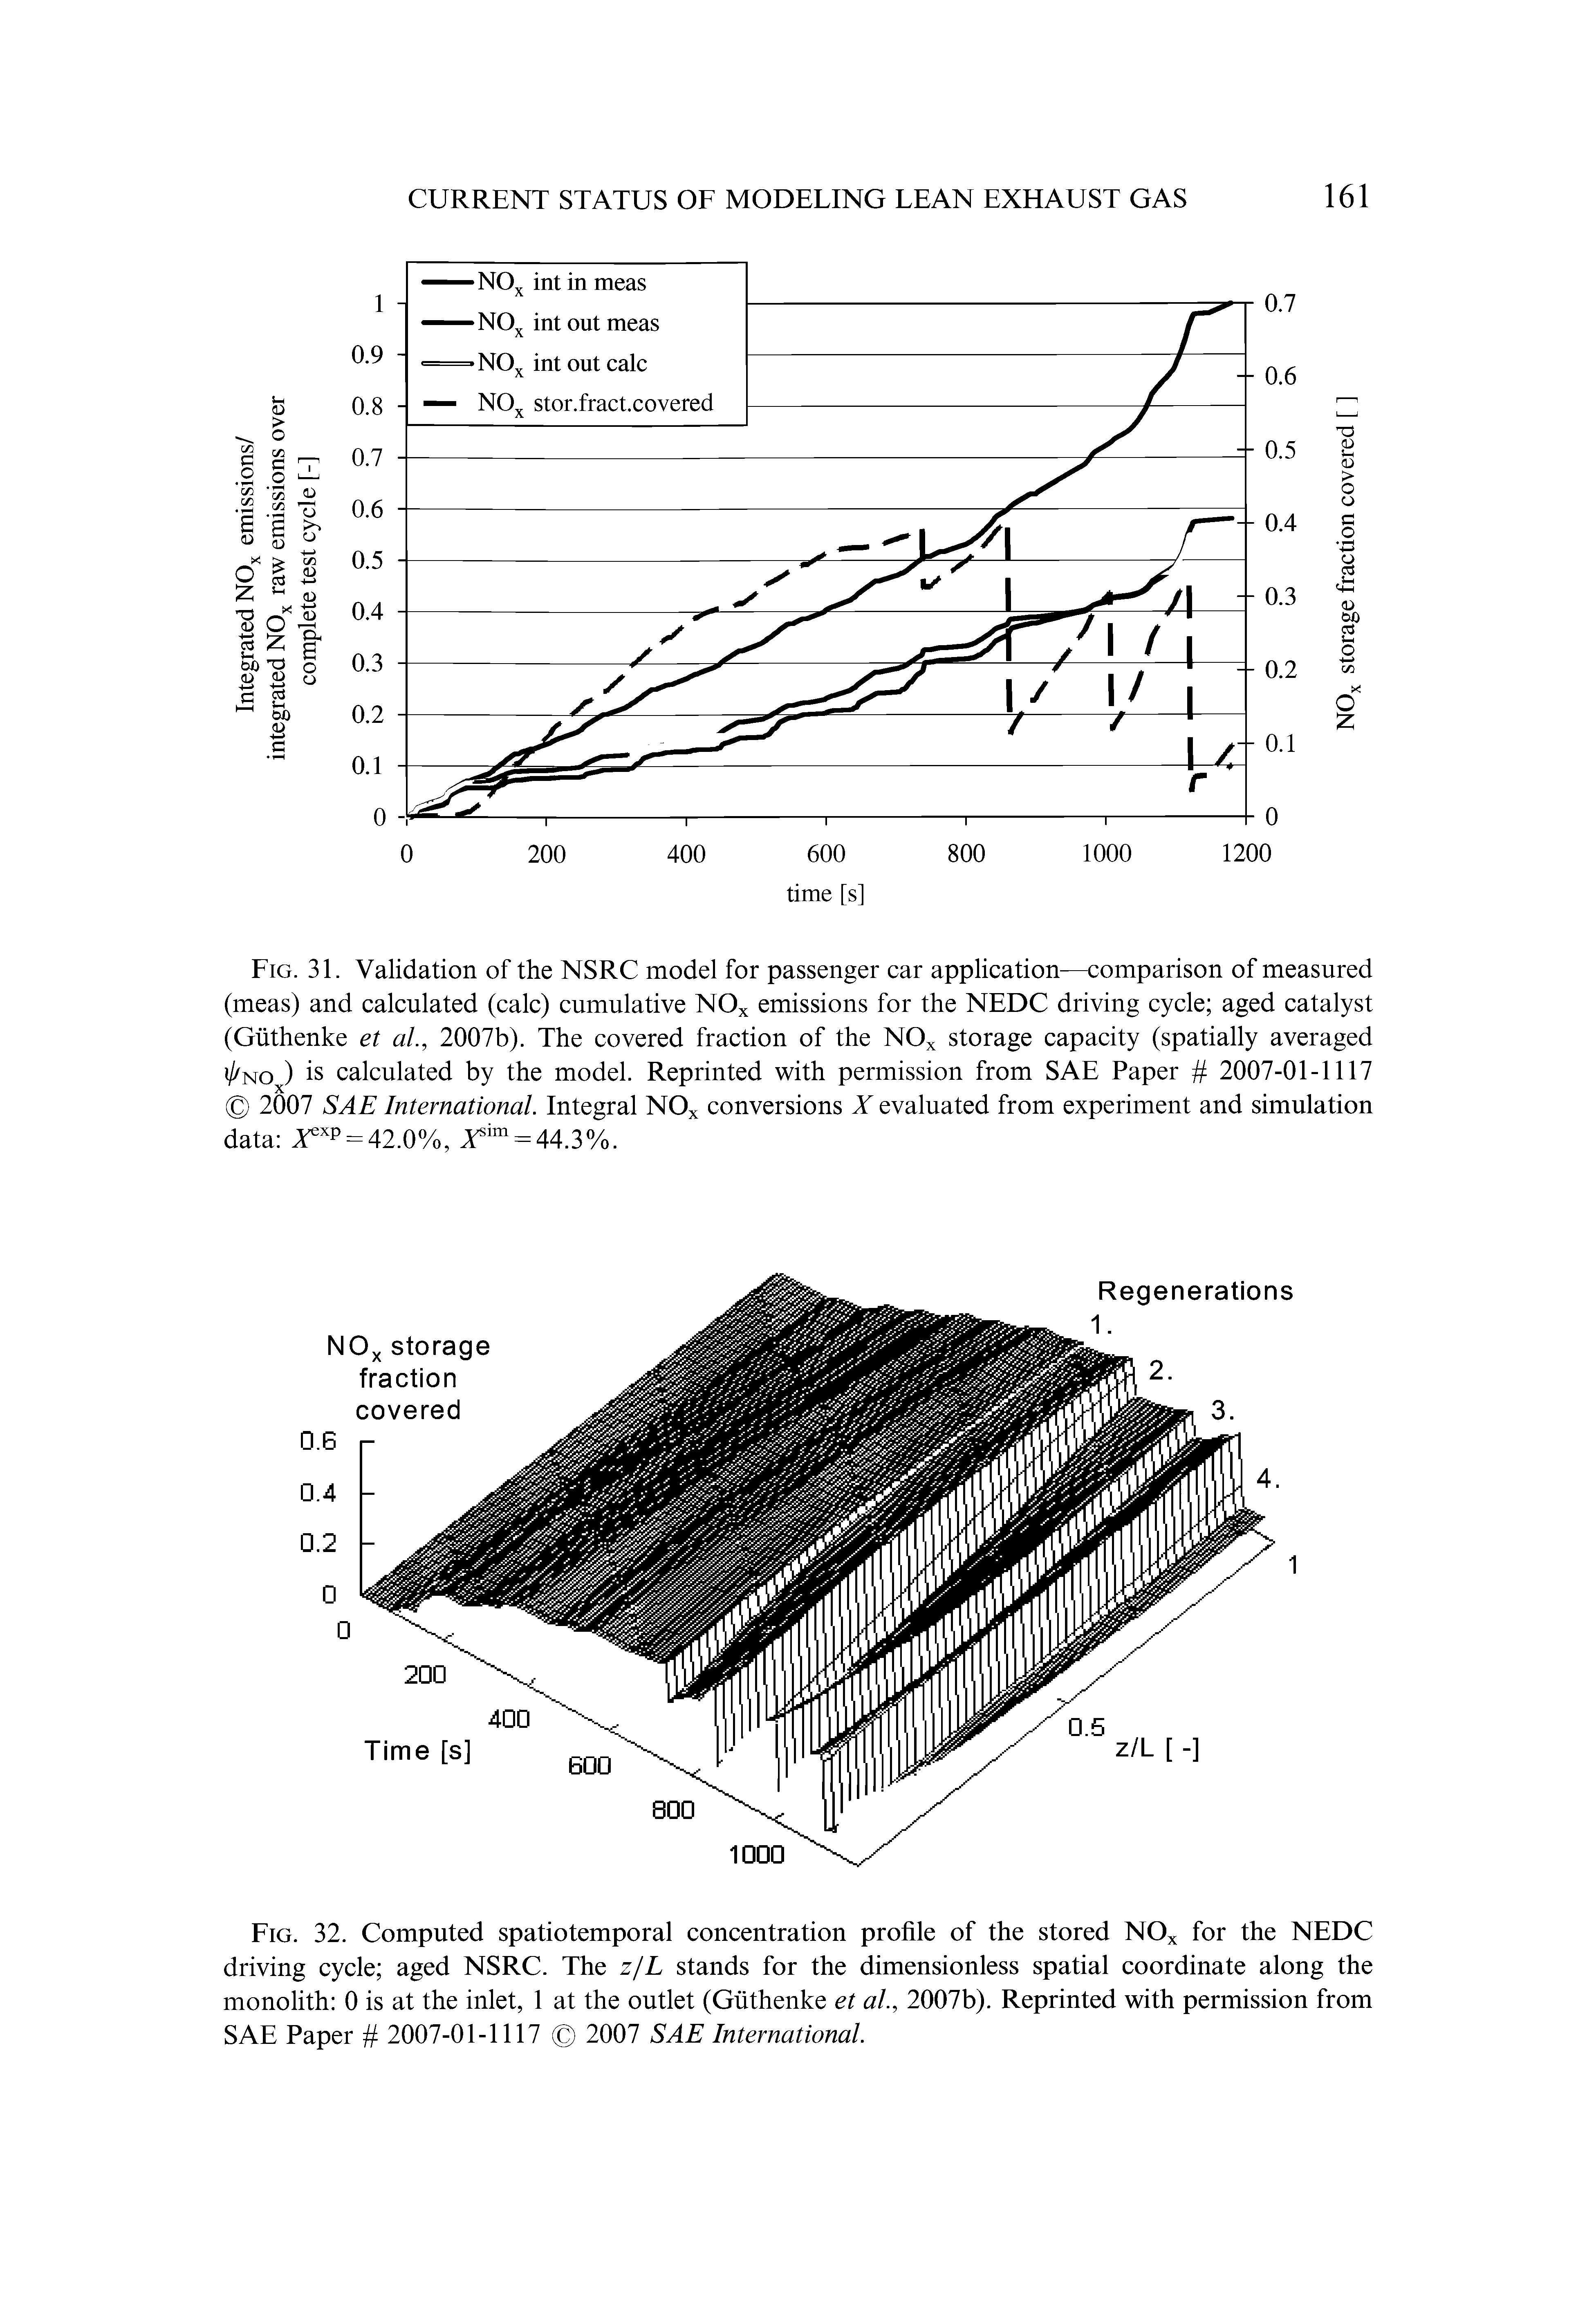 Fig. 3E Validation of the NSRC model for passenger car application—comparison of measured (meas) and calculated (calc) cumulative NOx emissions for the NEDC driving cycle aged catalyst (Giithenke et al., 2007b). The covered fraction of the NOx storage capacity (spatially averaged i/fNO ) is calculated by the model. Reprinted with permission from SAE Paper 2007-01-1117 2007 SAE International. Integral NOx conversions X evaluated from experiment and simulation data Aexp = 42.0%, = 44.3%.